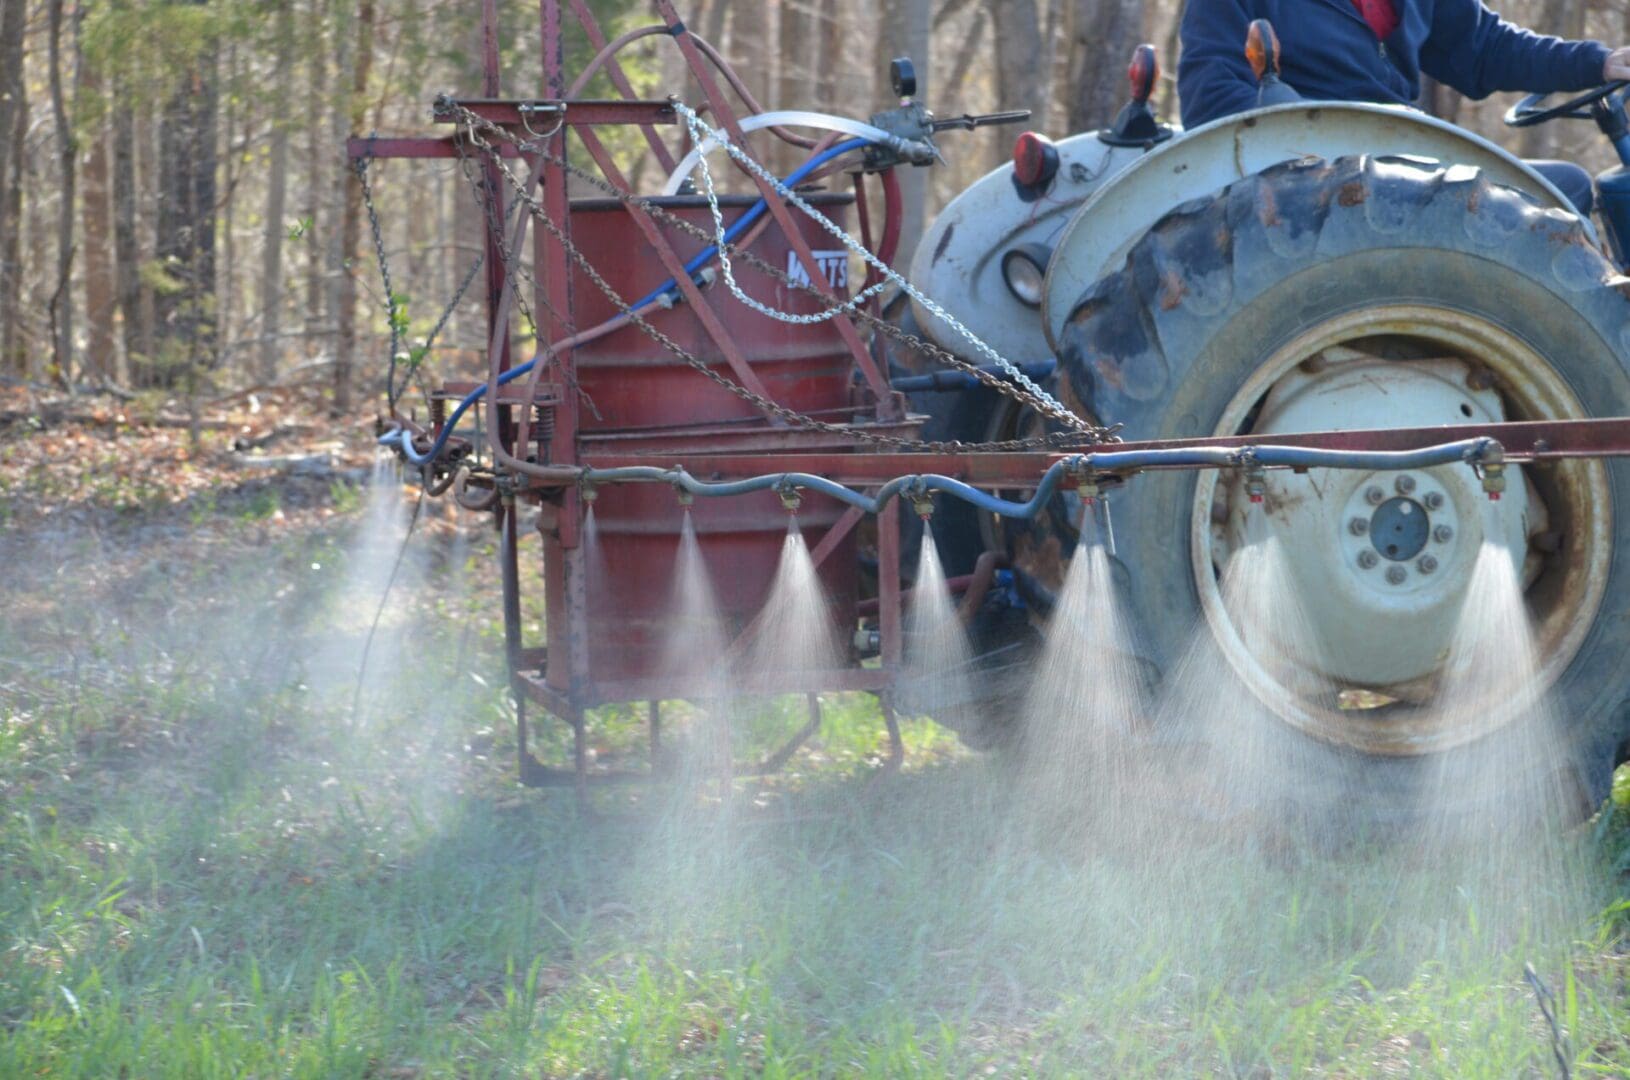 A tractor spraying pesticide on the ground.